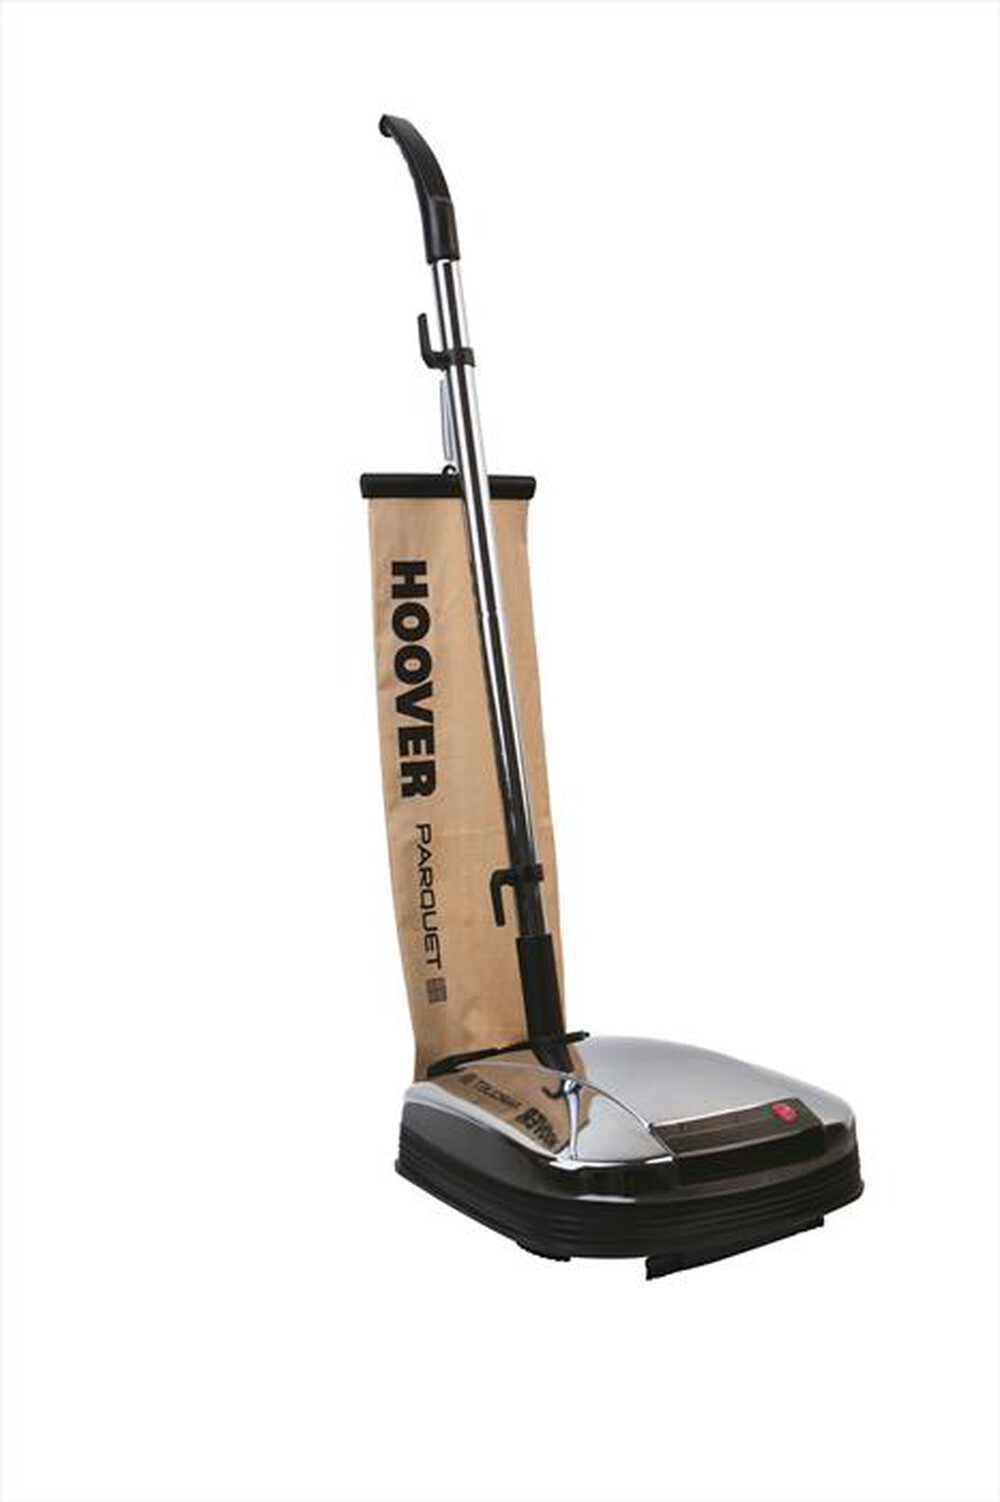 "HOOVER - F38PQ/1 011"